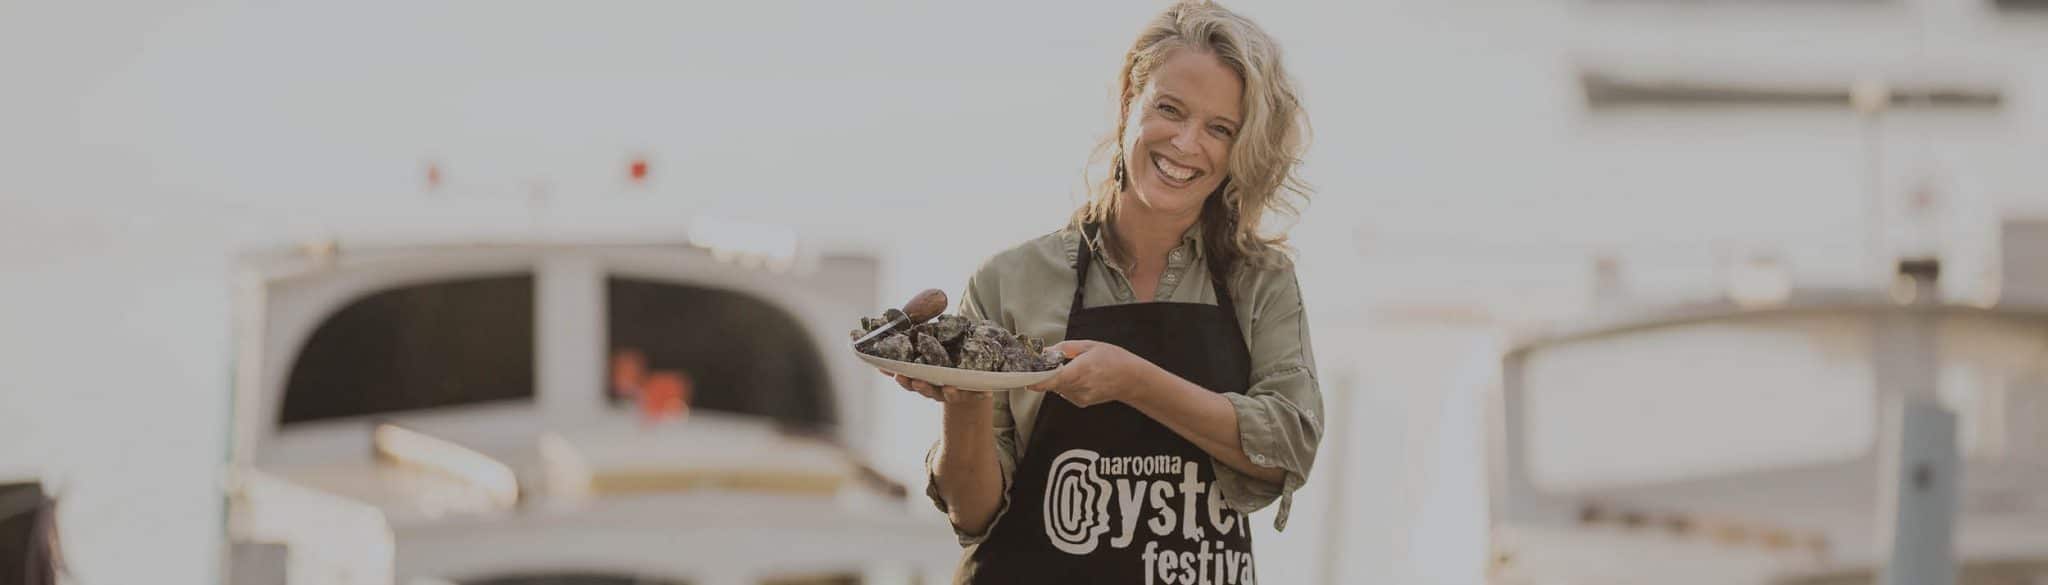 Narooma Oyster festival promotional image